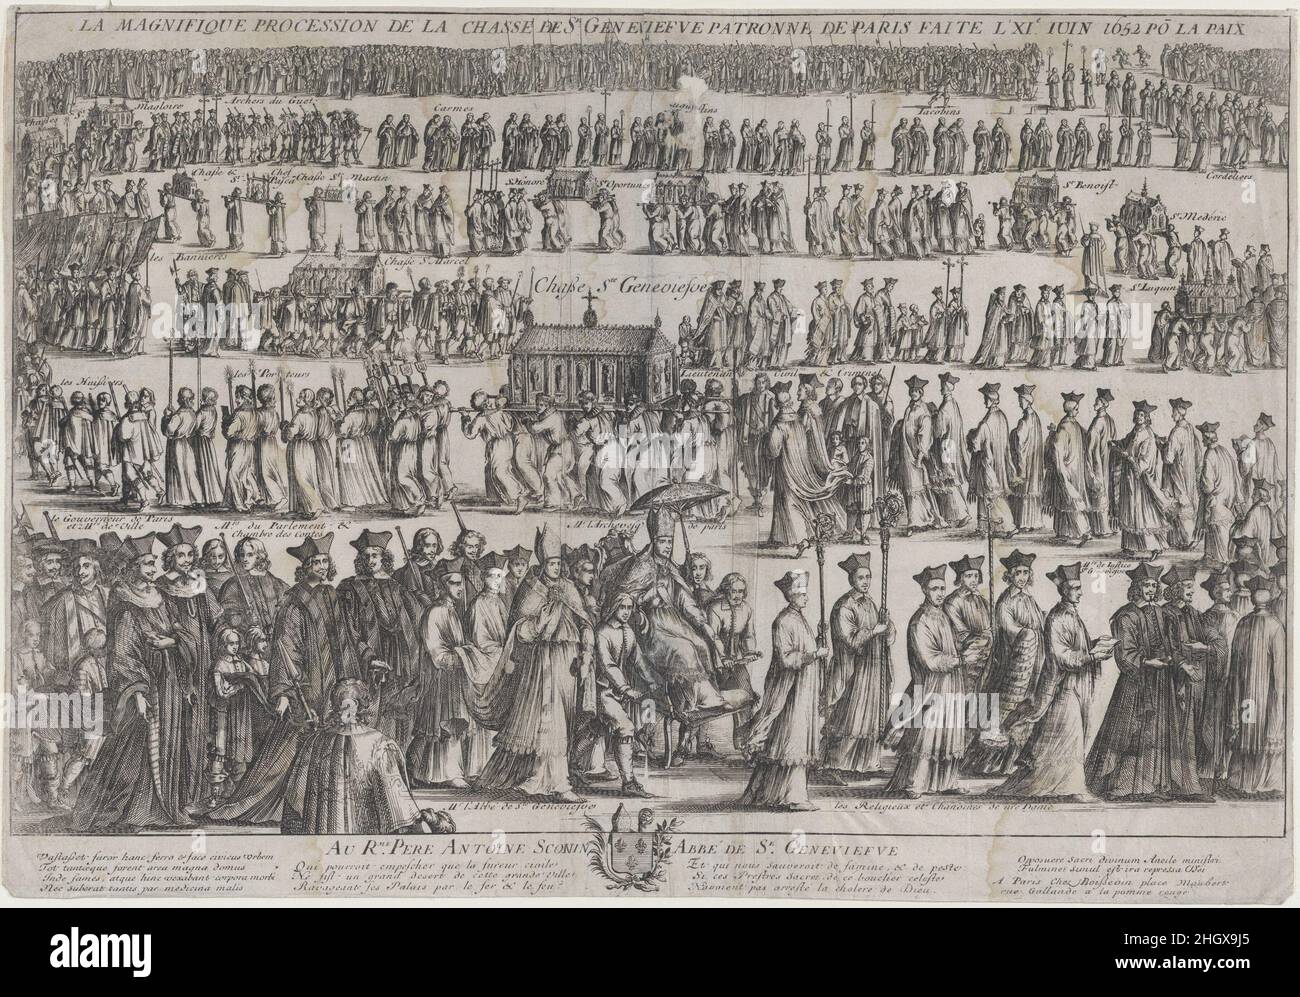 The procession of the casket of St. Genevieve, with clerics and laymen marching in six rows; in the foreground the Archbishop of Paris is carried in a chair, the Chasse in the row above him, and the monks of the monasteries of Paris lead the procession at top 1652 Nicolas Cochin. The procession of the casket of St. Genevieve, with clerics and laymen marching in six rows; in the foreground the Archbishop of Paris is carried in a chair, the Chasse in the row above him, and the monks of the monasteries of Paris lead the procession at top. Nicolas Cochin (French, Troyes 1610–1686 Paris). 1652. Etc Stock Photo